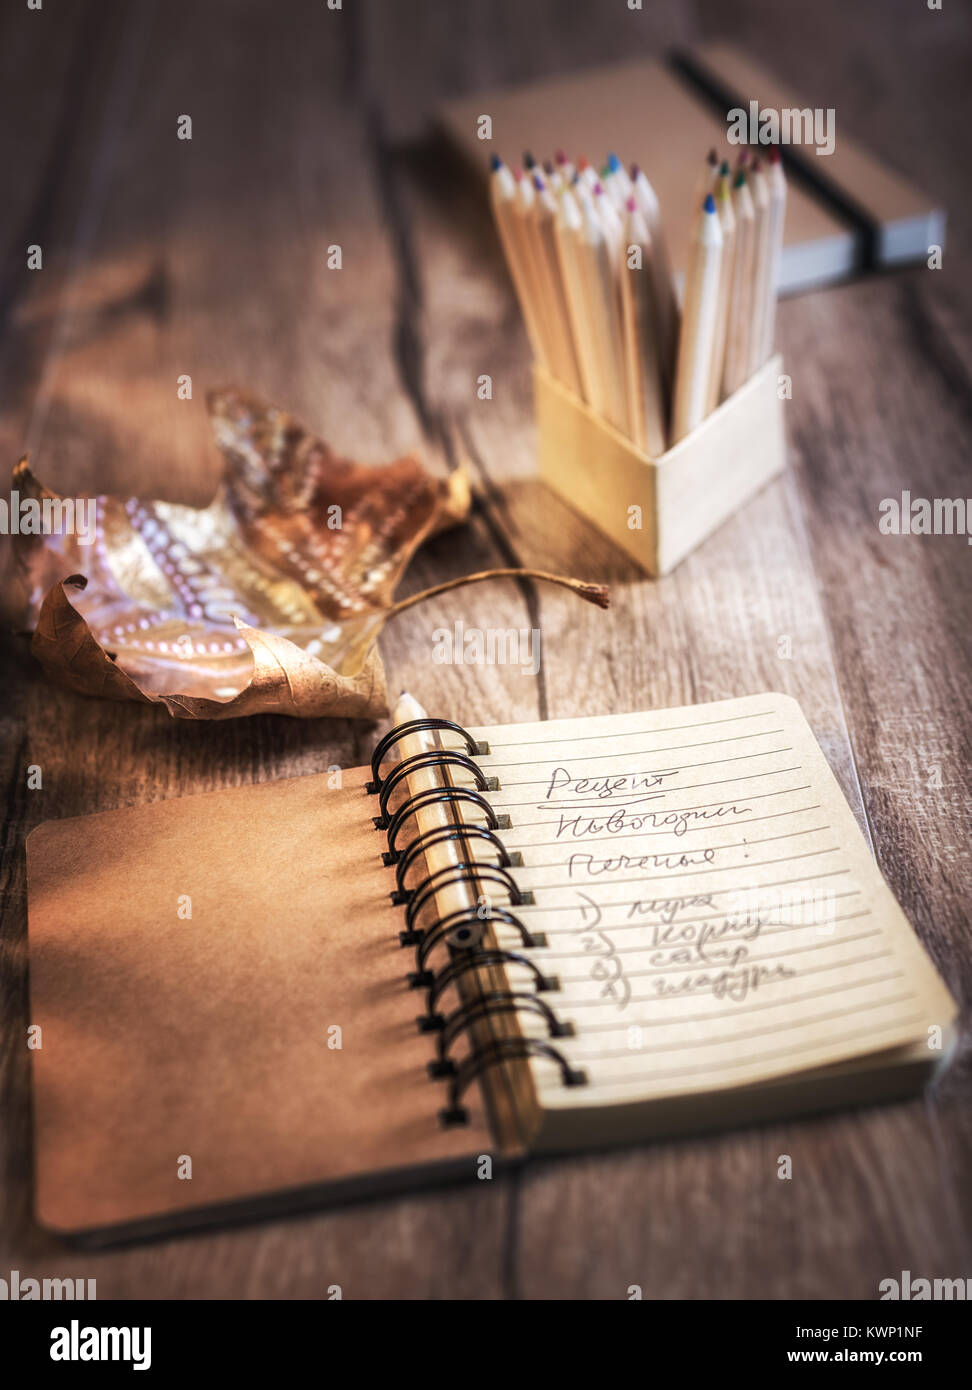 Open notebook with cookie recipe on a table with pencils and decorated marple leaf. This image is toned. Shallow DOF, focus on the writing. Stock Photo